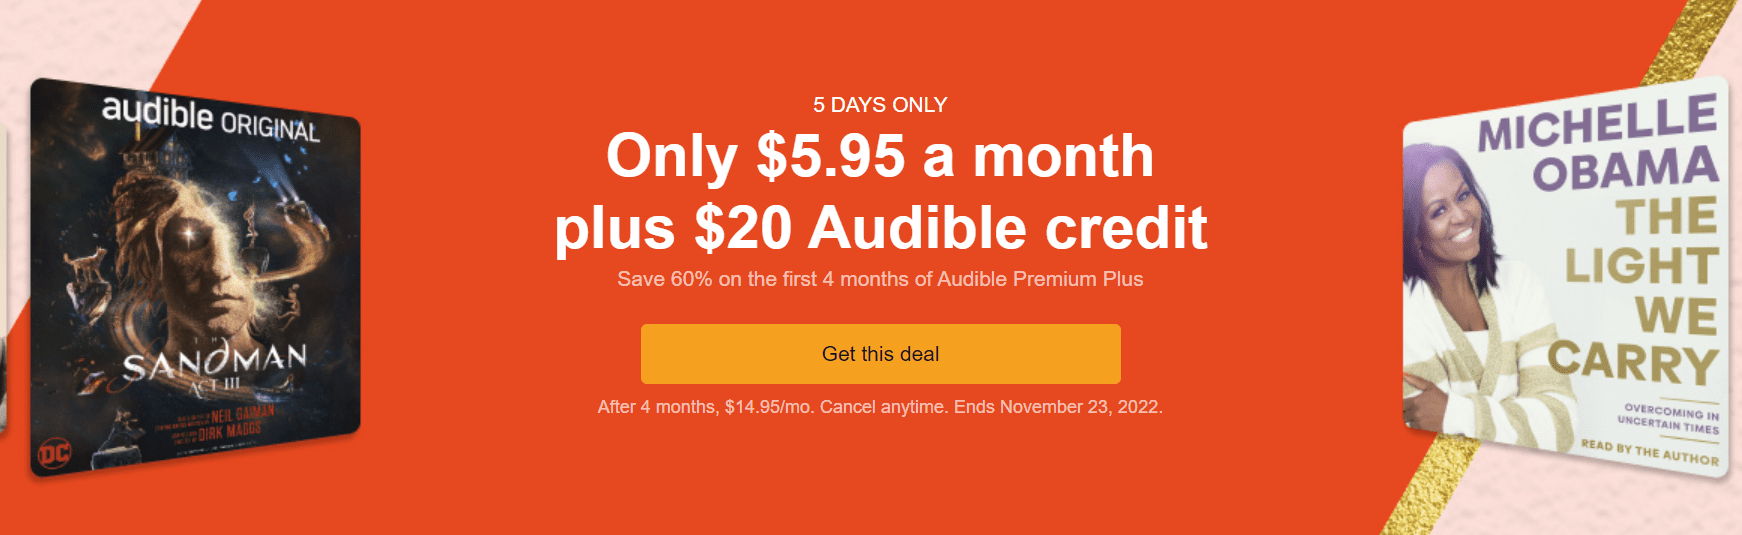 Audible Prime Day Deal on ! 4 Months for $5.95 Per Month!